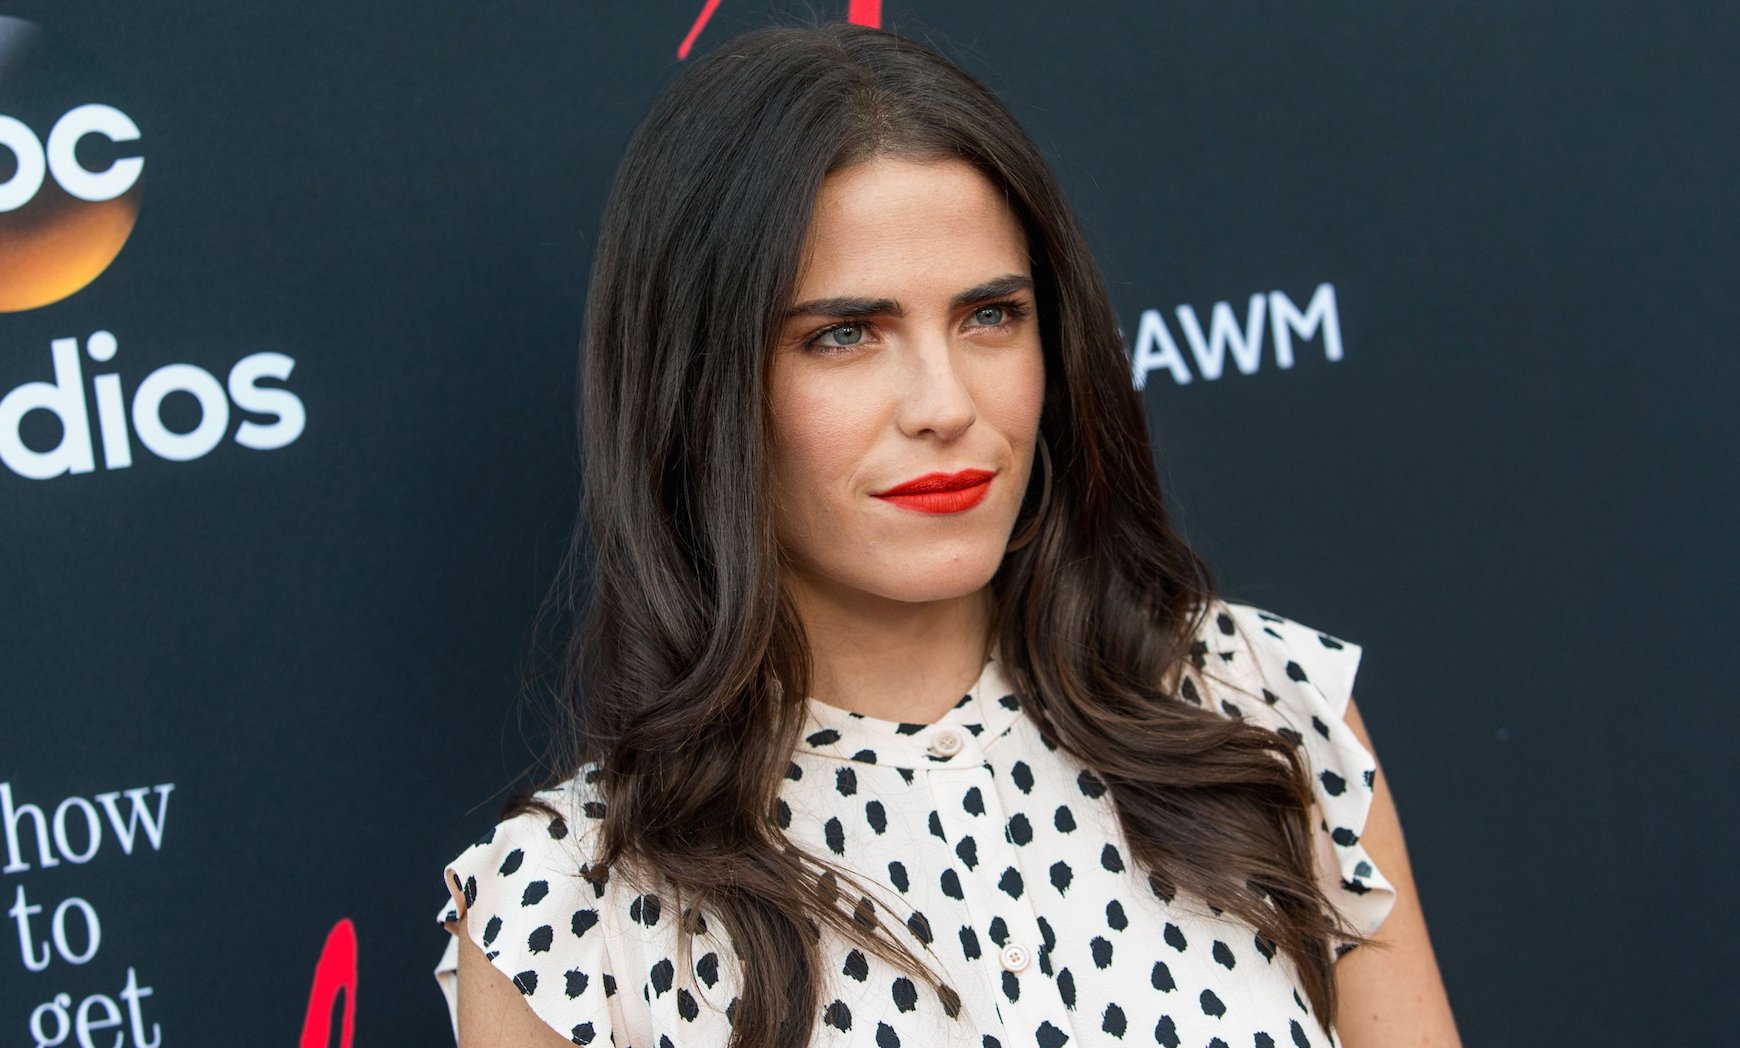 46 Facts About Karla Souza - Facts.net